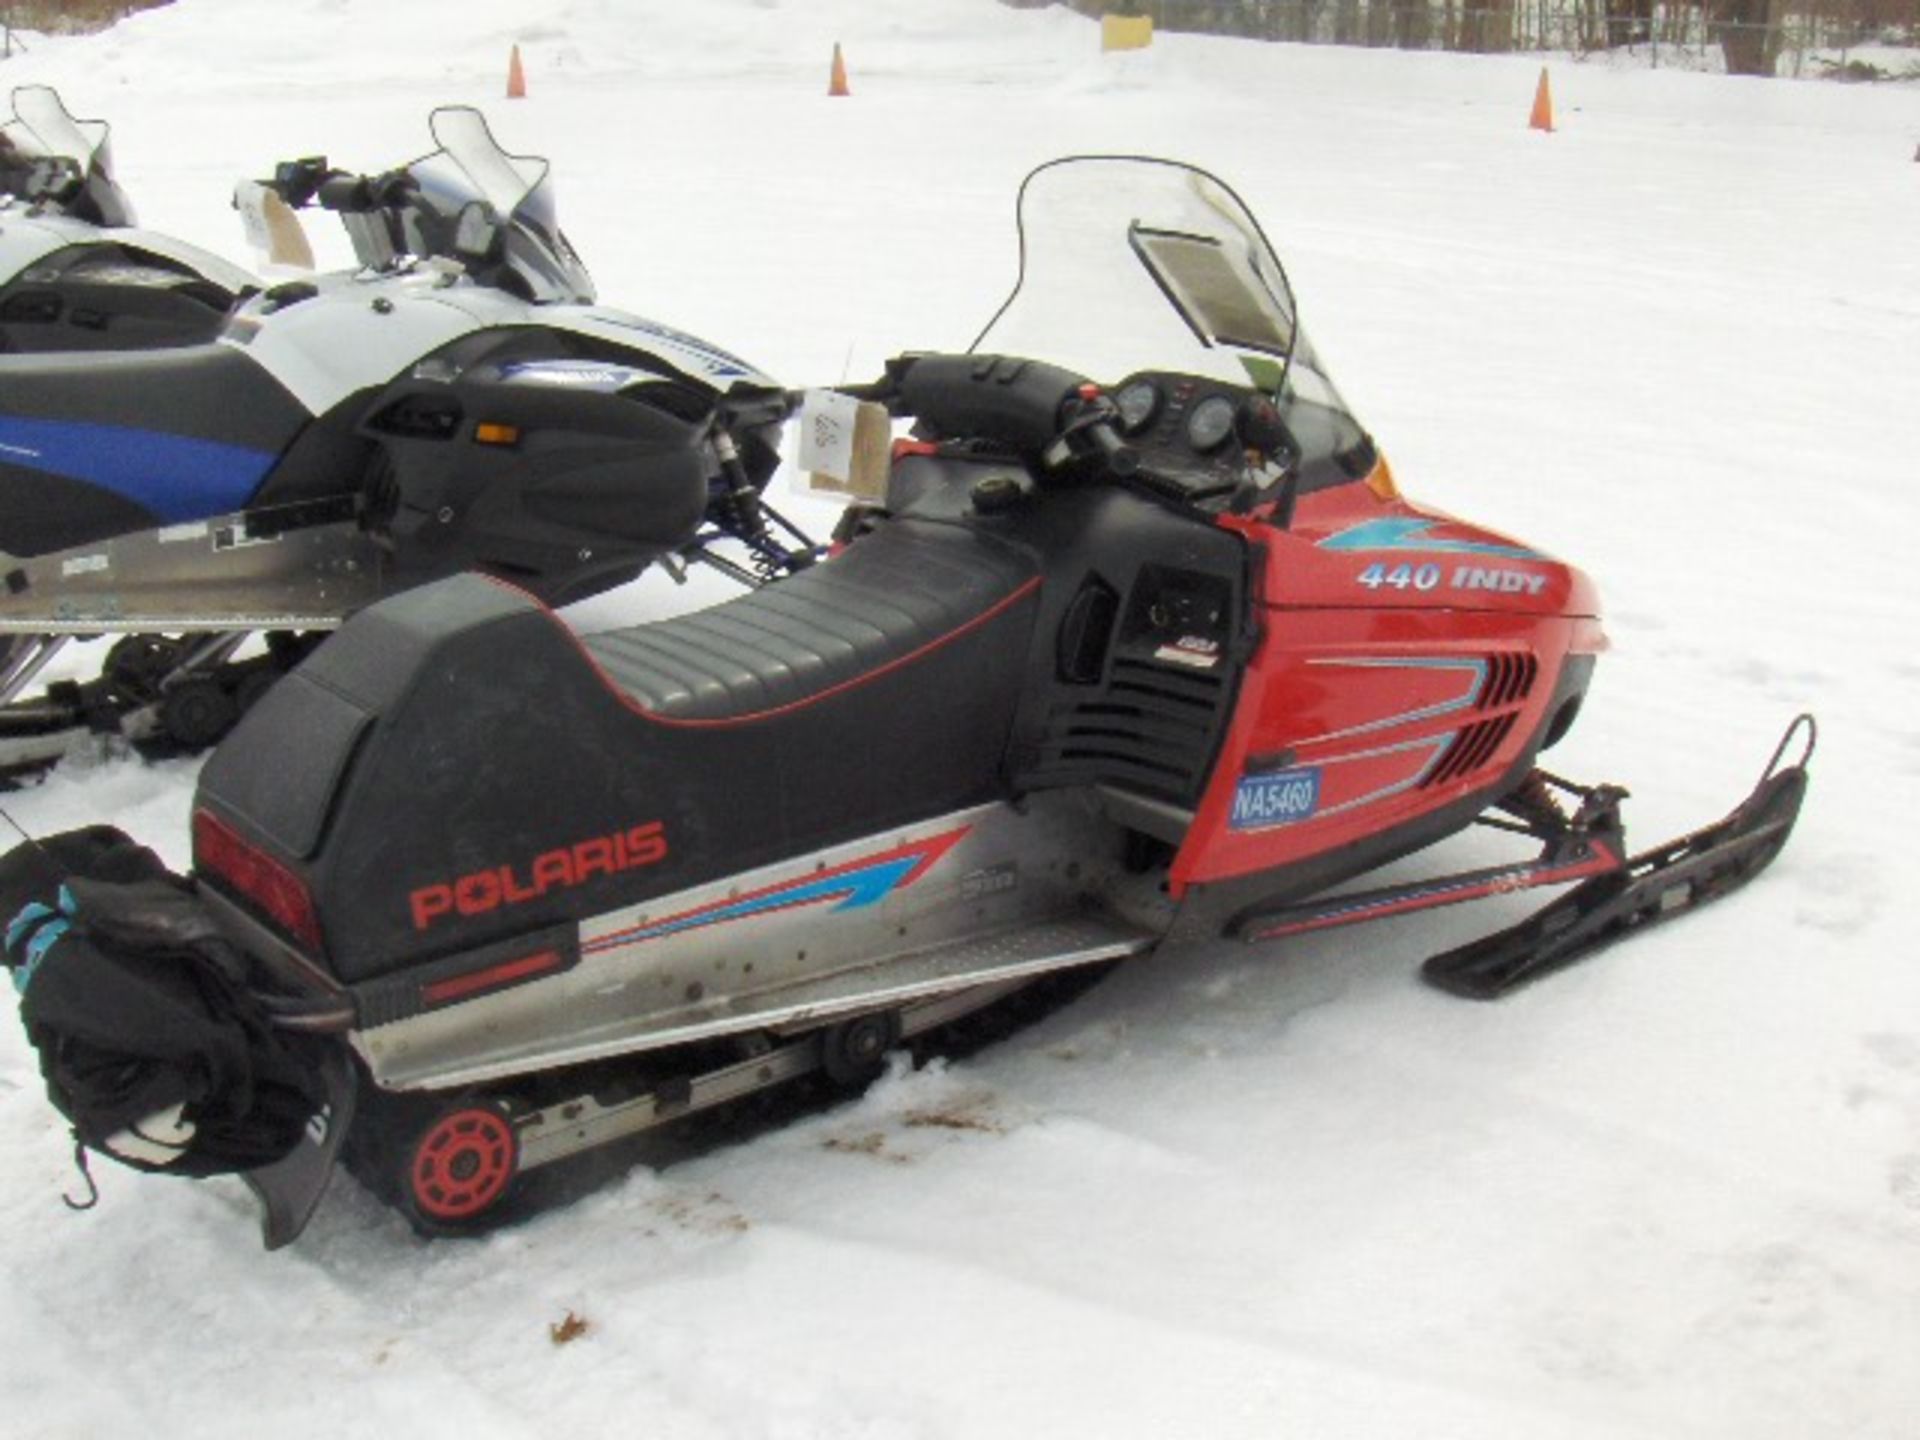 1994 POLARIS 440 INDY SPORT 2212891 snowmobile, sold with a signed registration - Image 4 of 4